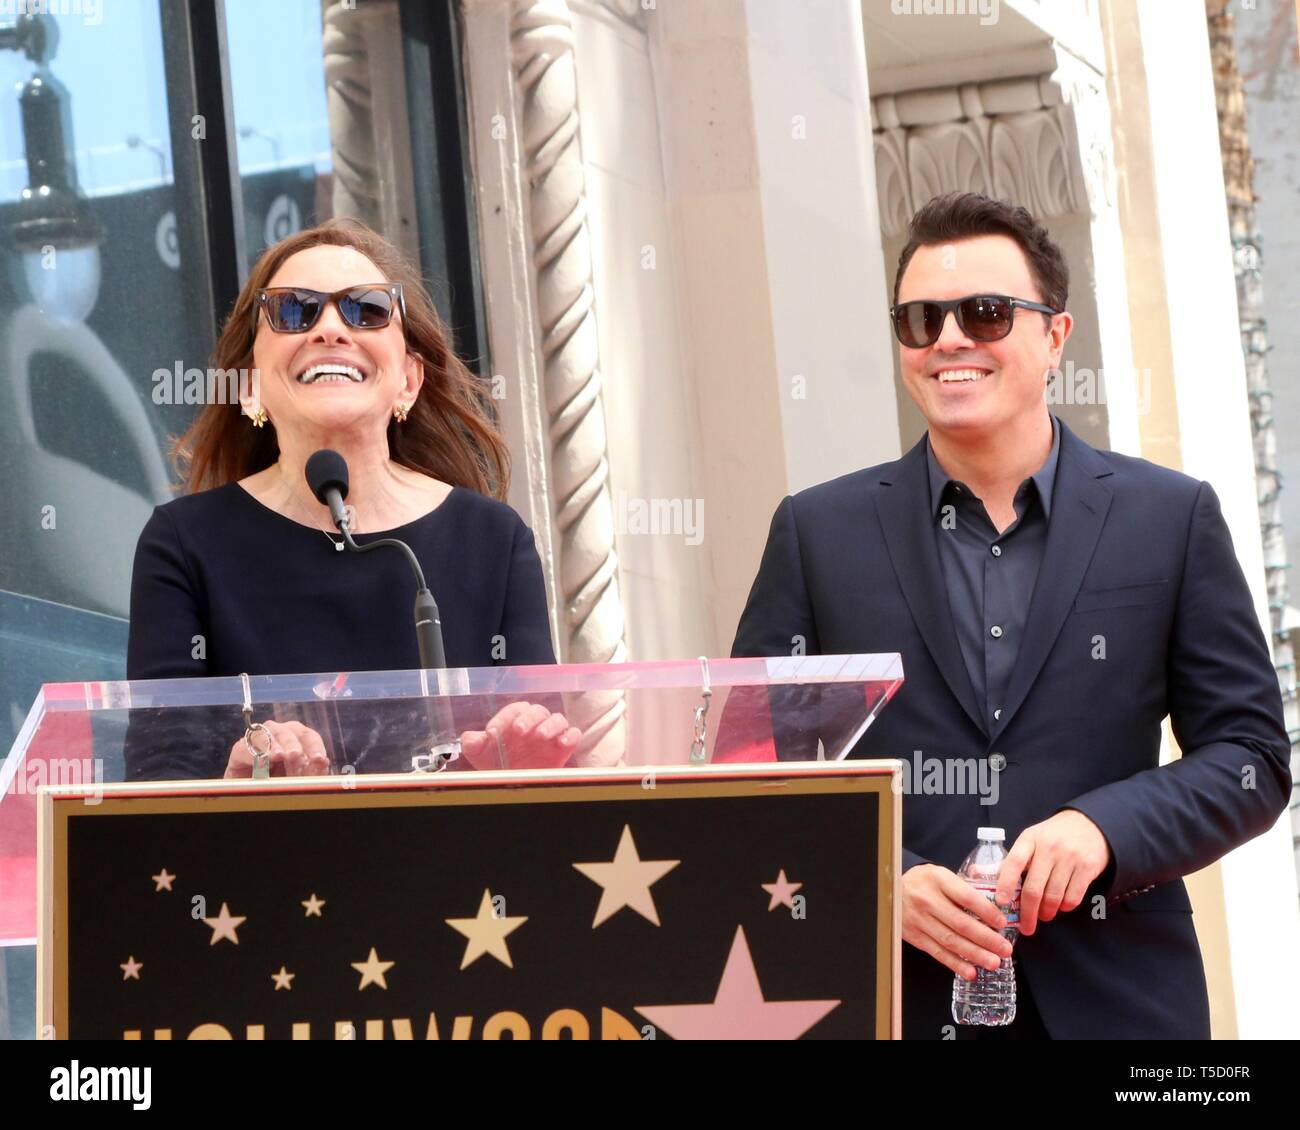 Los Angeles, CA, USA. 23rd Apr, 2019. Ann Druyan, Seth MacFarlane at the induction ceremony for Star on the Hollywood Walk of Fame for Seth McFarland, Hollywood Boulevard, Los Angeles, CA April 23, 2019. Credit: Priscilla Grant/Everett Collection/Alamy Live News Stock Photo